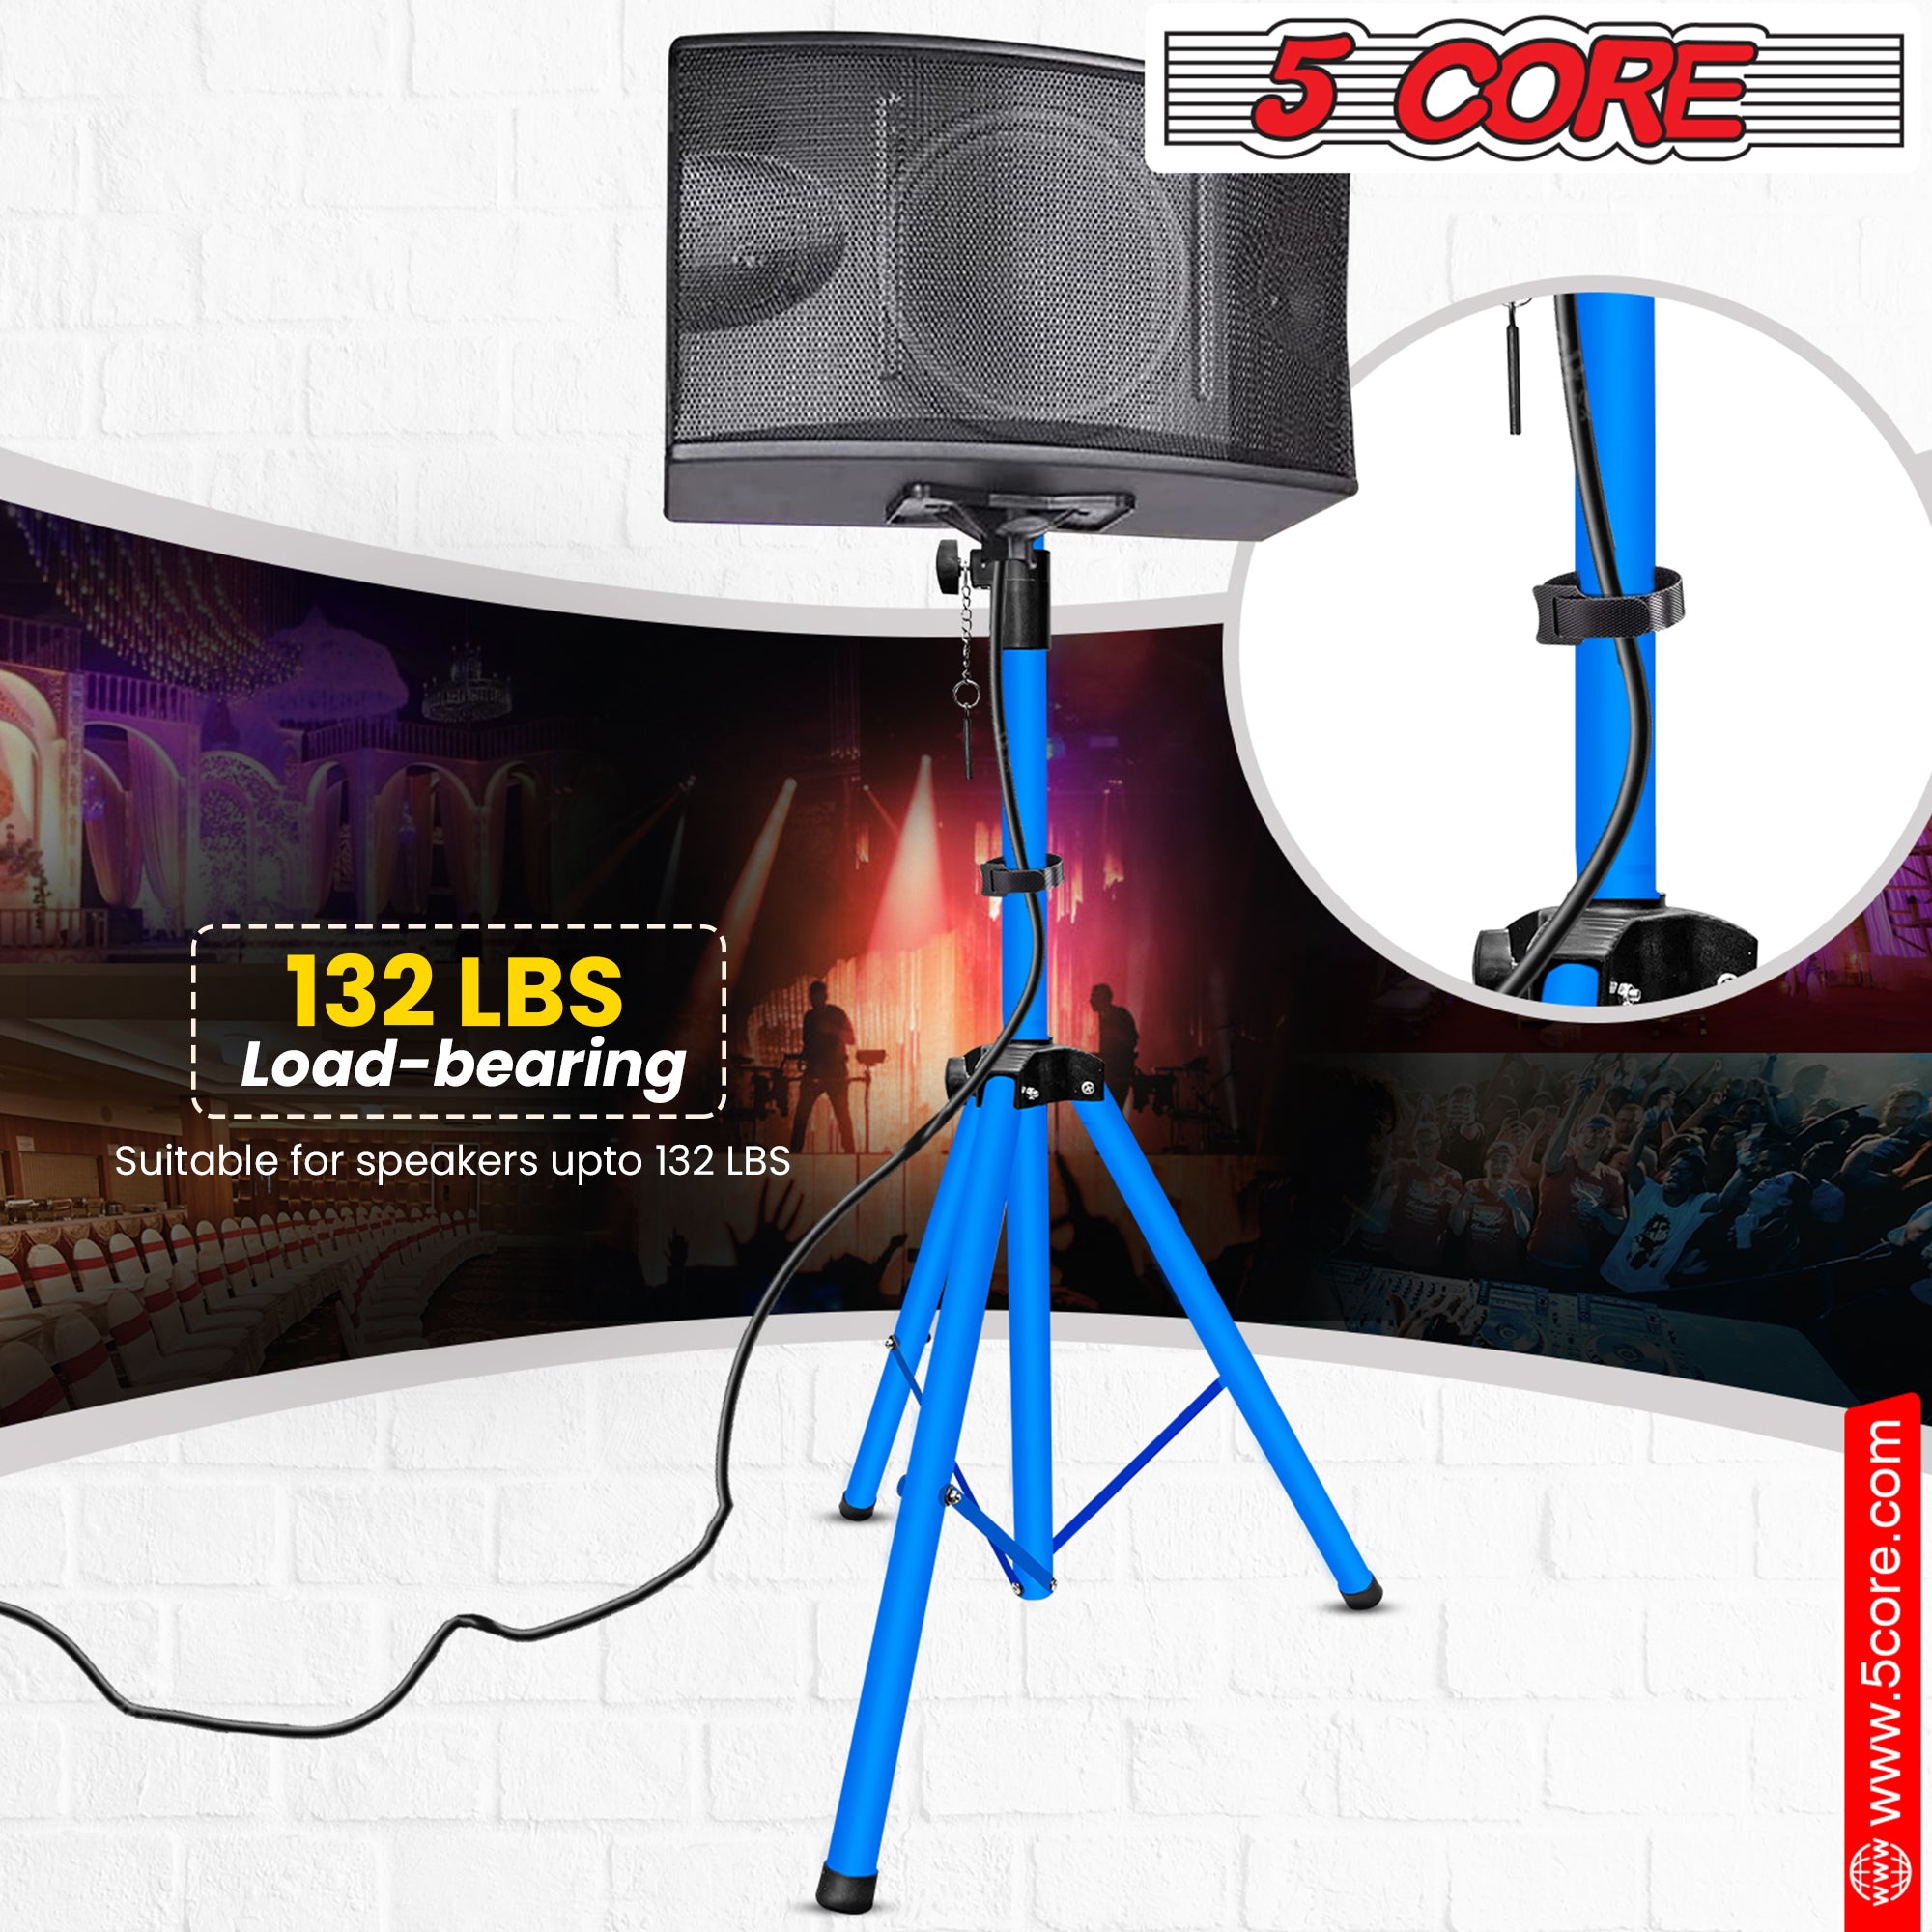 Compatible with various speakers, adjustable height, outdoor use.